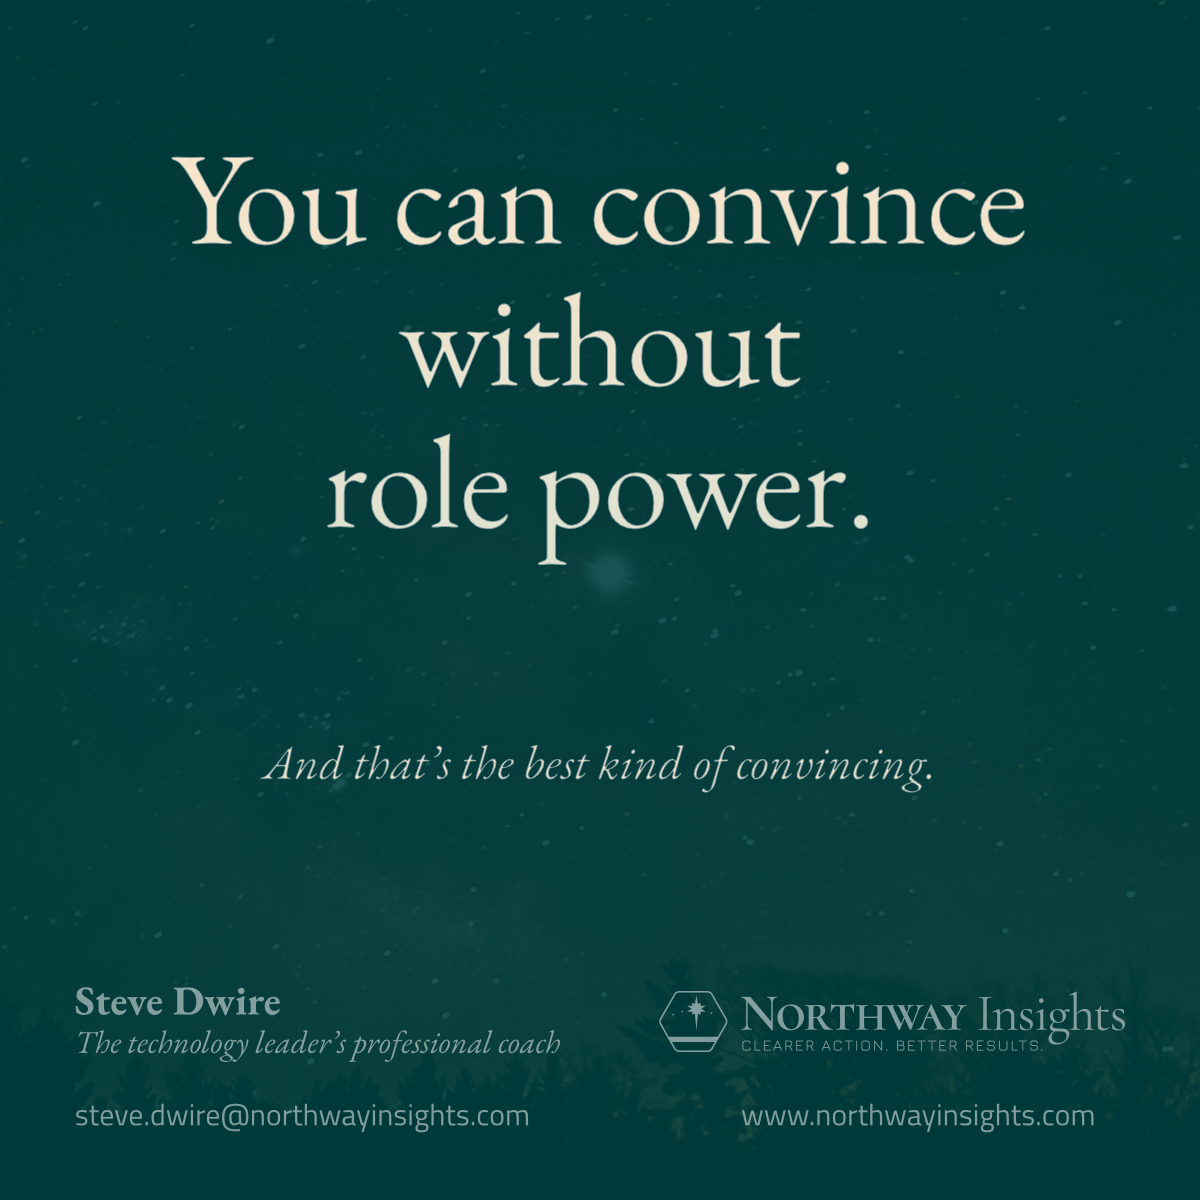 You can convince without role power. (And that's the best kind of convincing.)